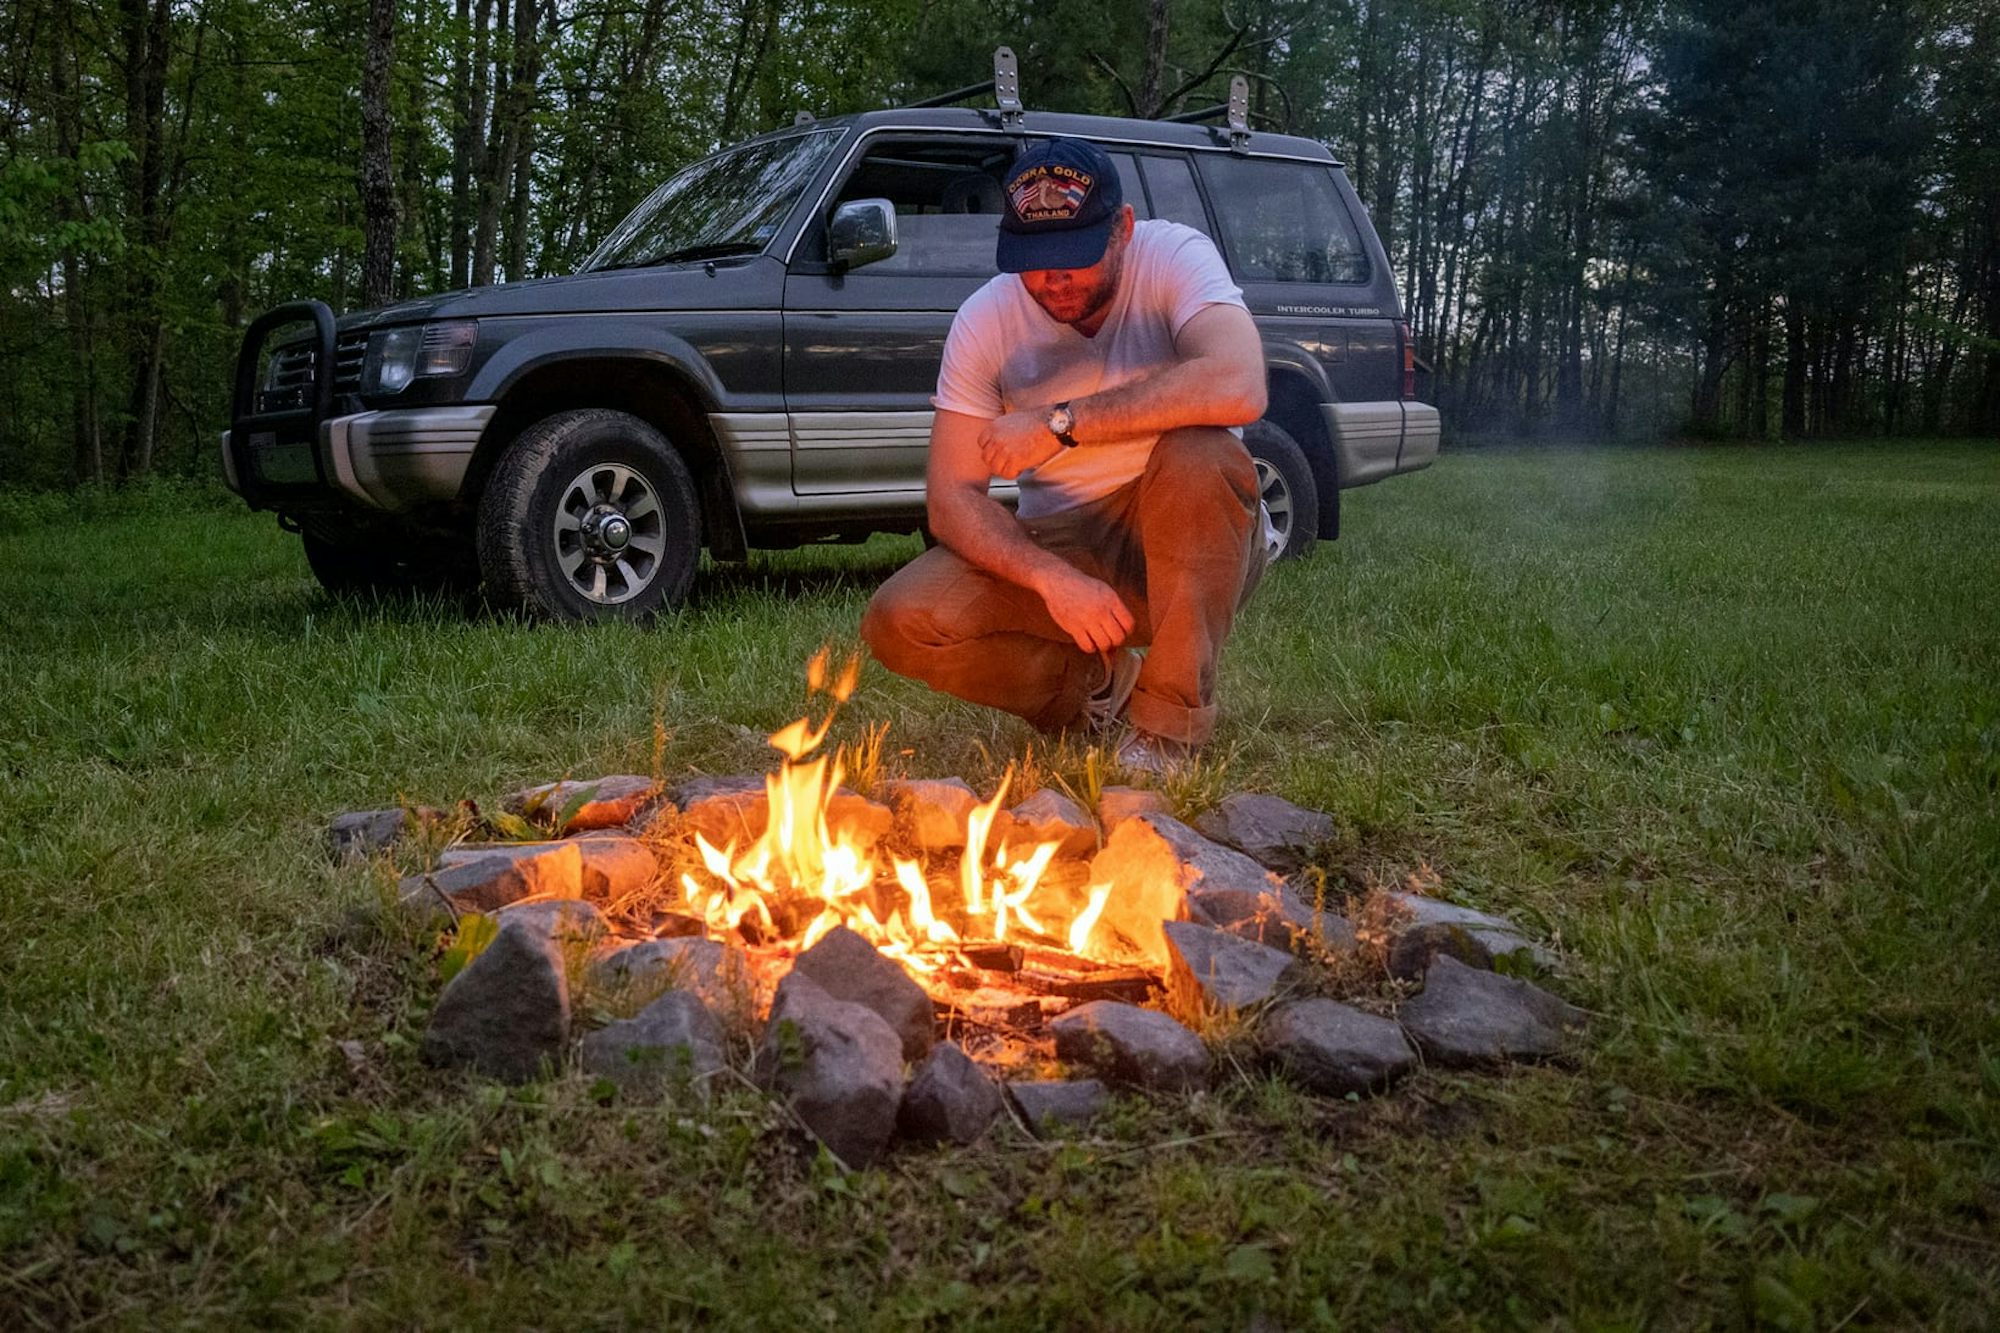 Cole by the campfire